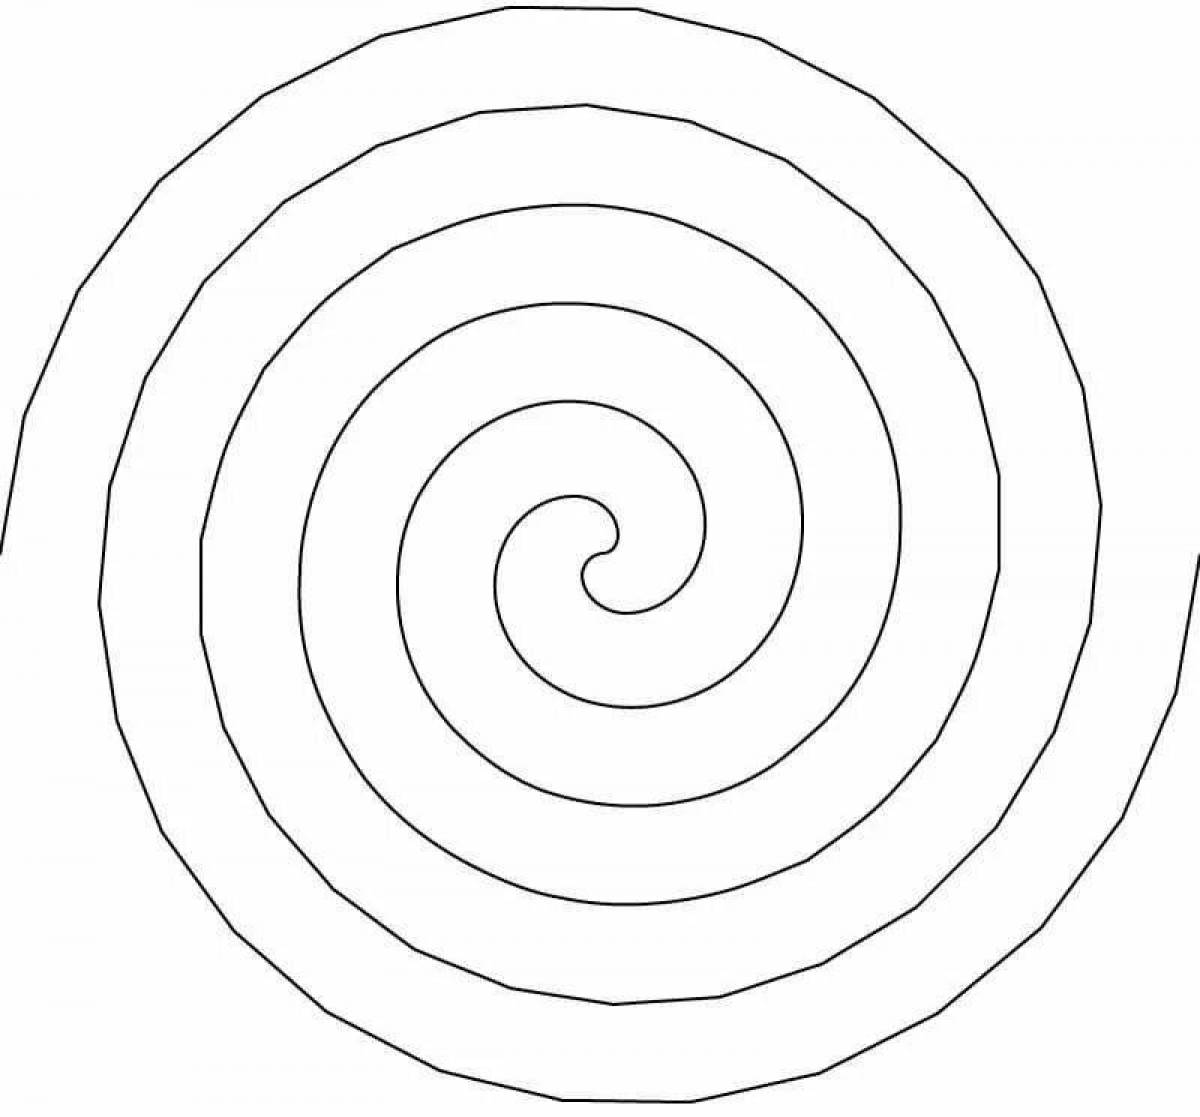 Create a fun round spiral coloring page